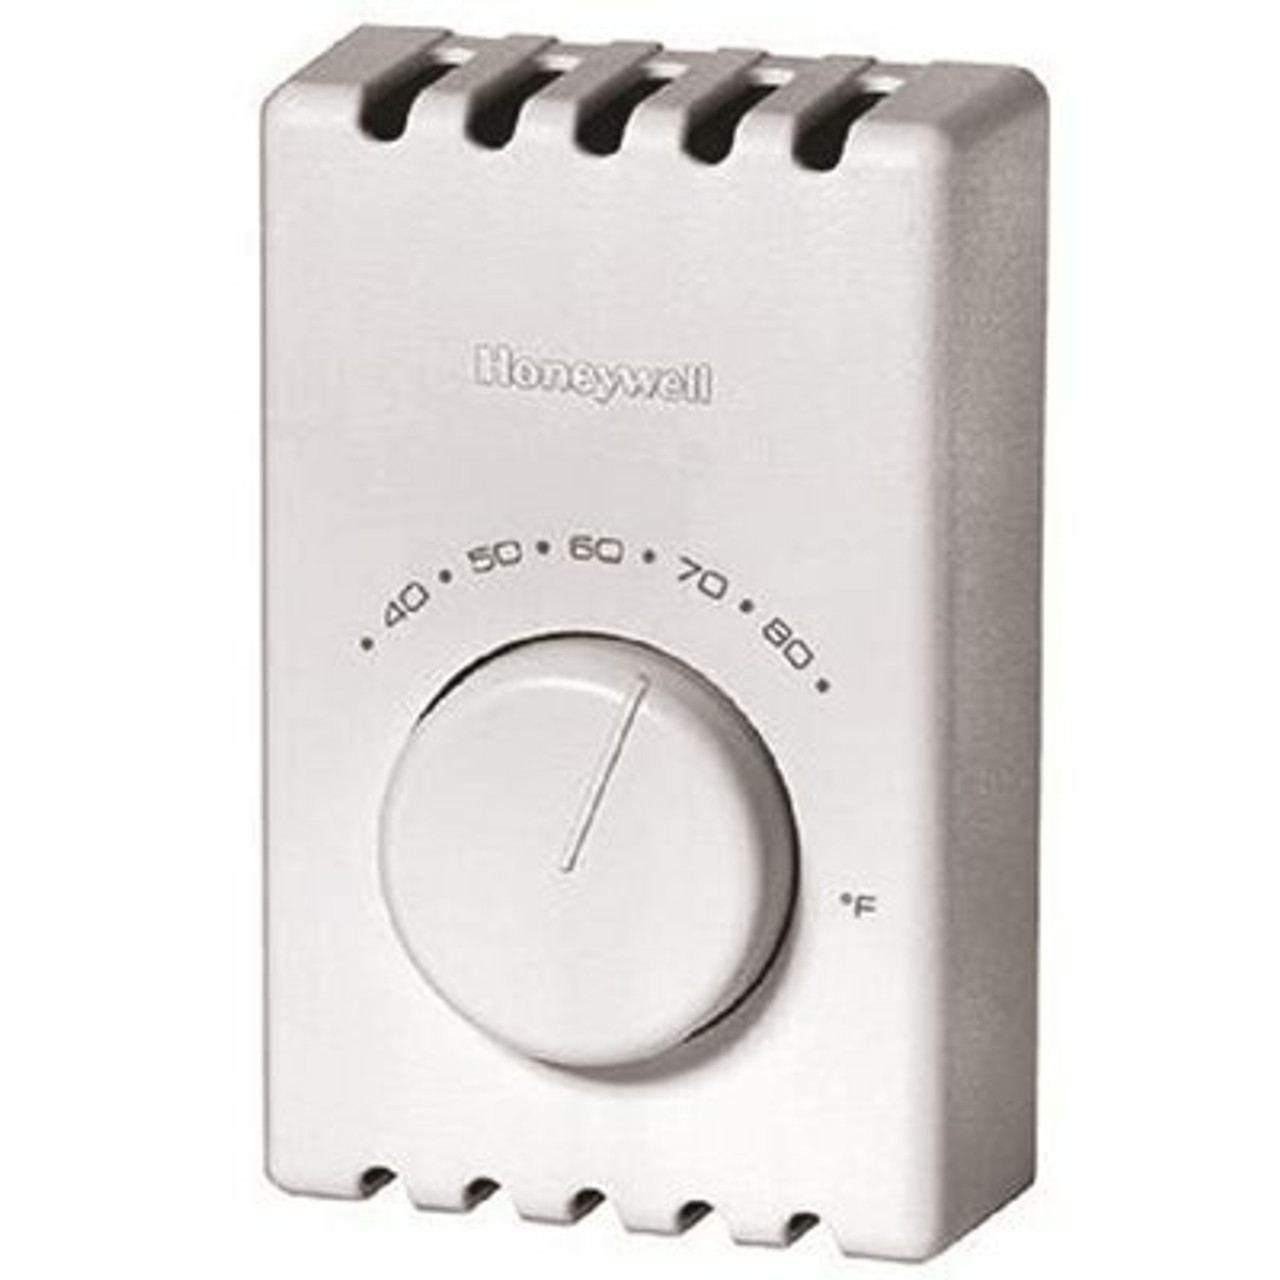 Honeywell Home Non-Programmable Two Pole Electric Baseboard Heater Thermostat